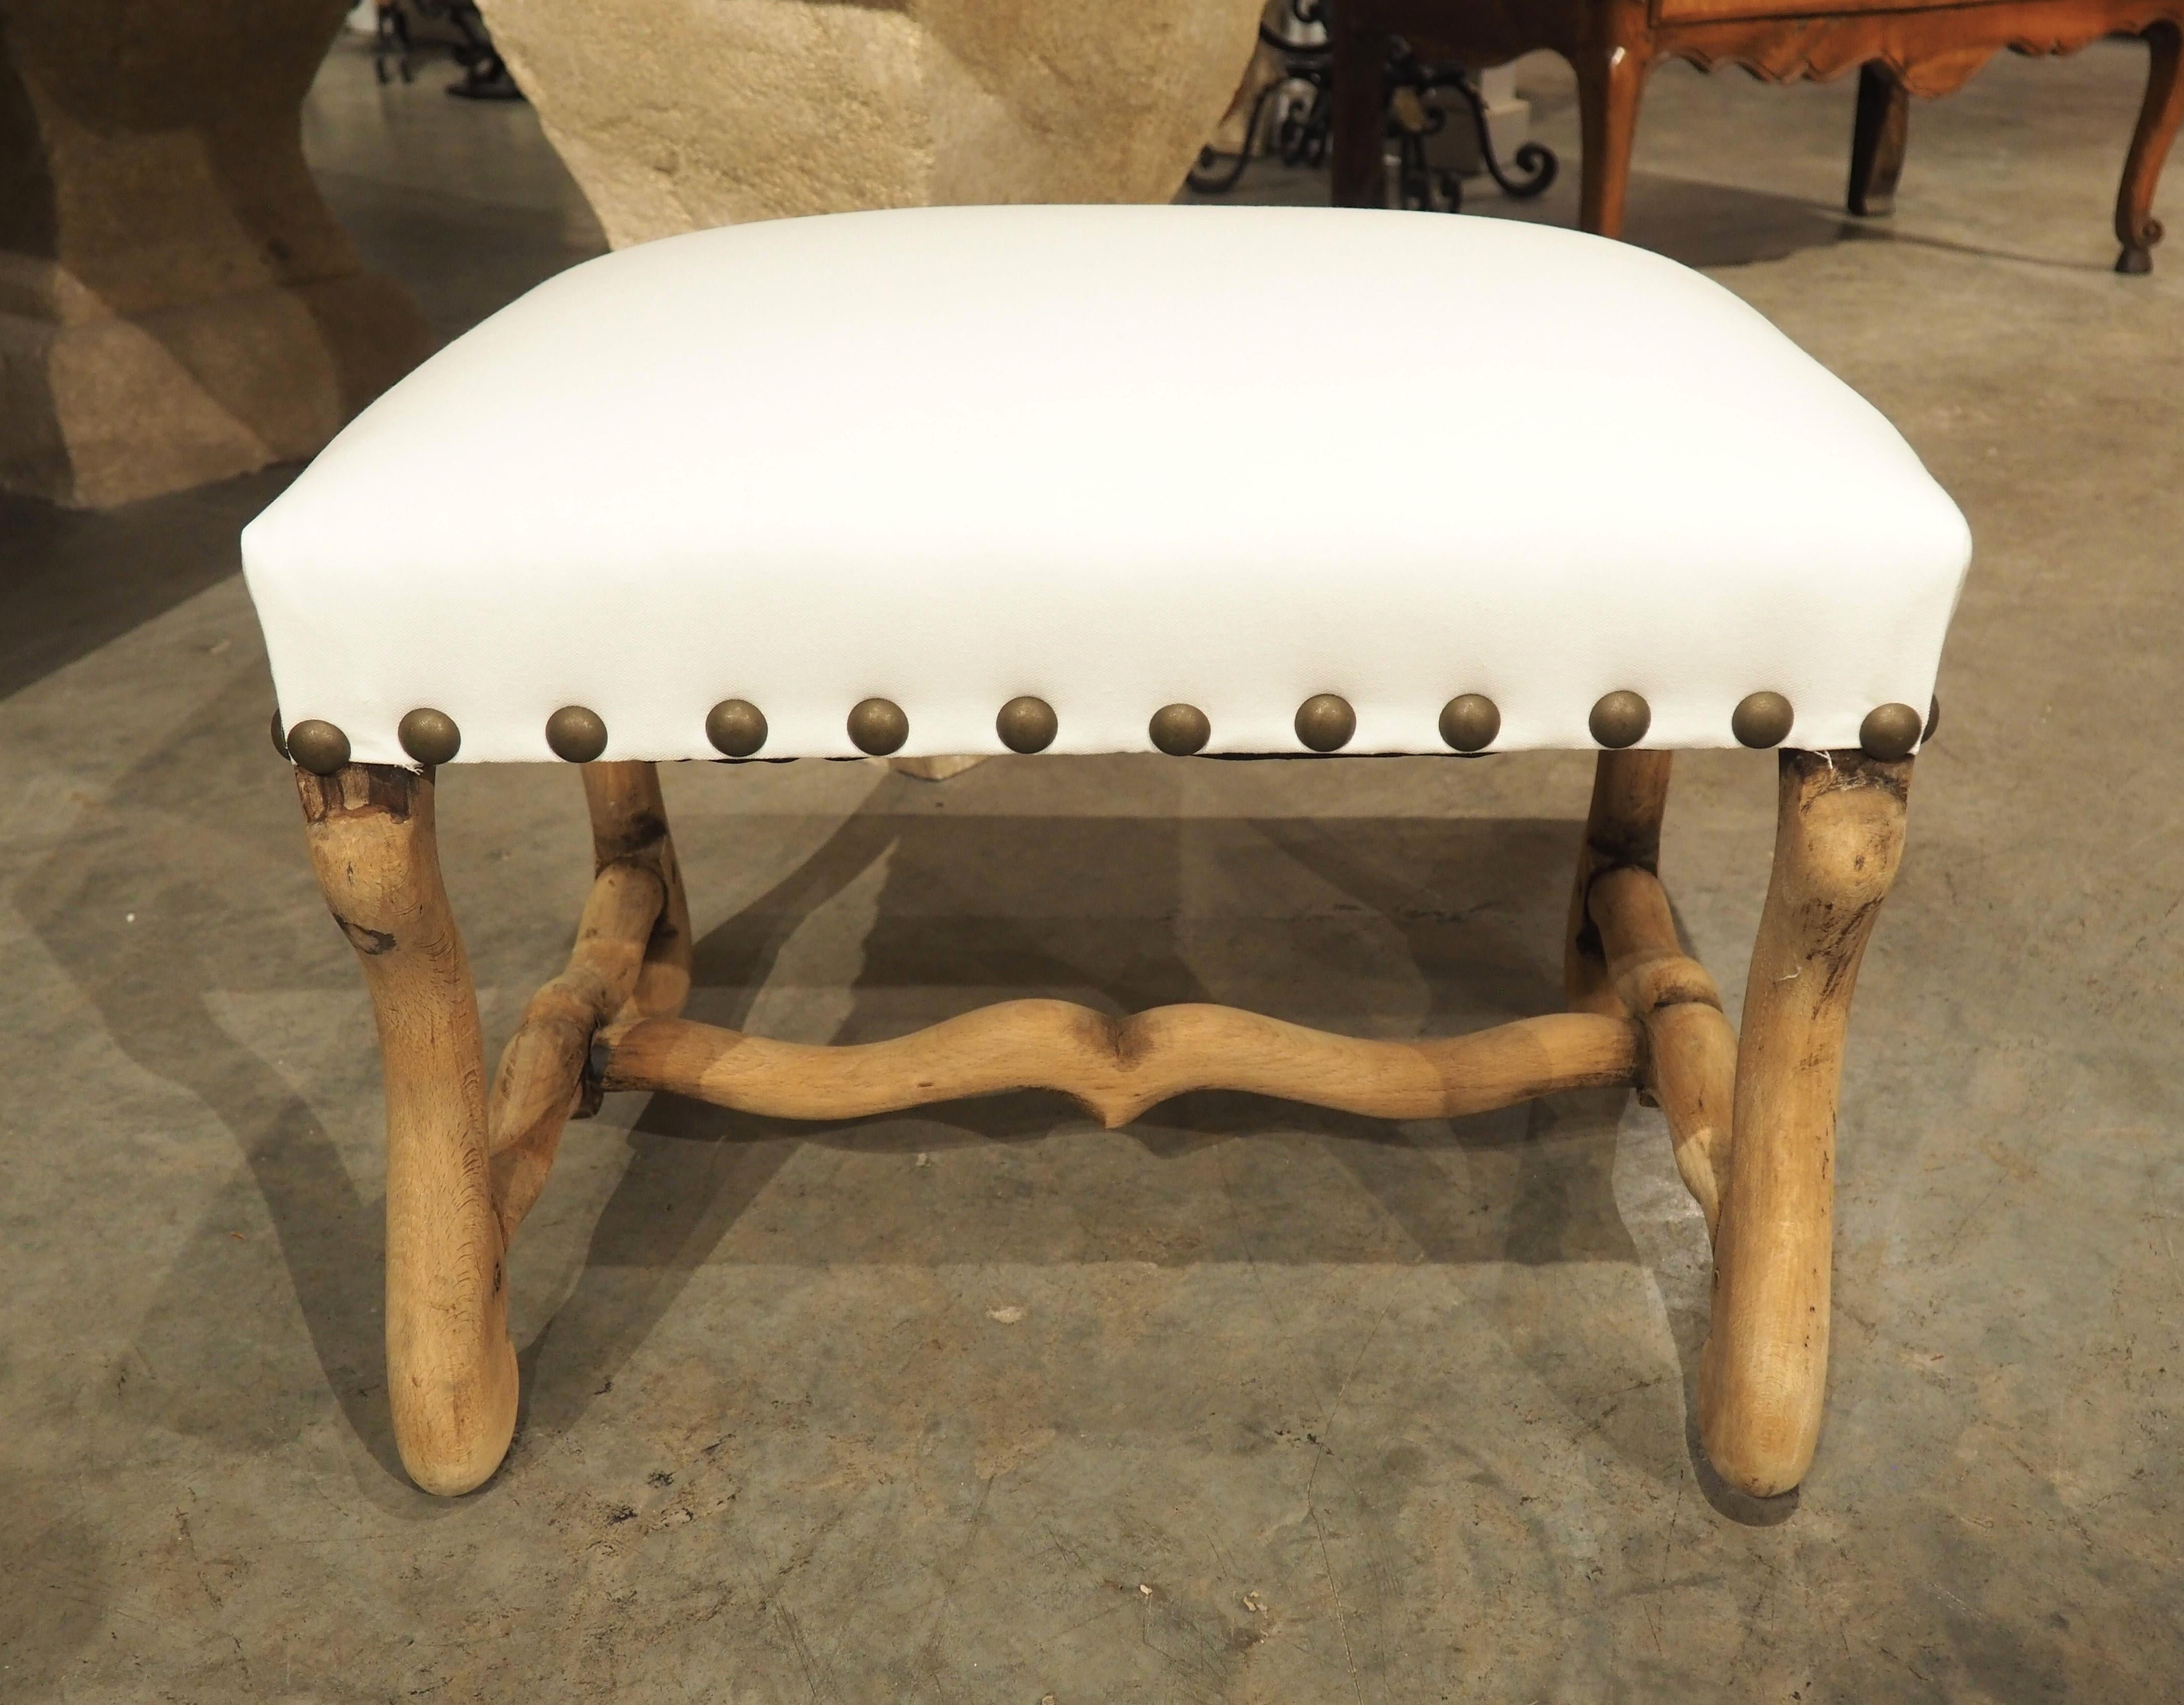 Bleached French Os De Mouton Tabouret Stool, White Cotton Upholstery, C. 1900 For Sale 2